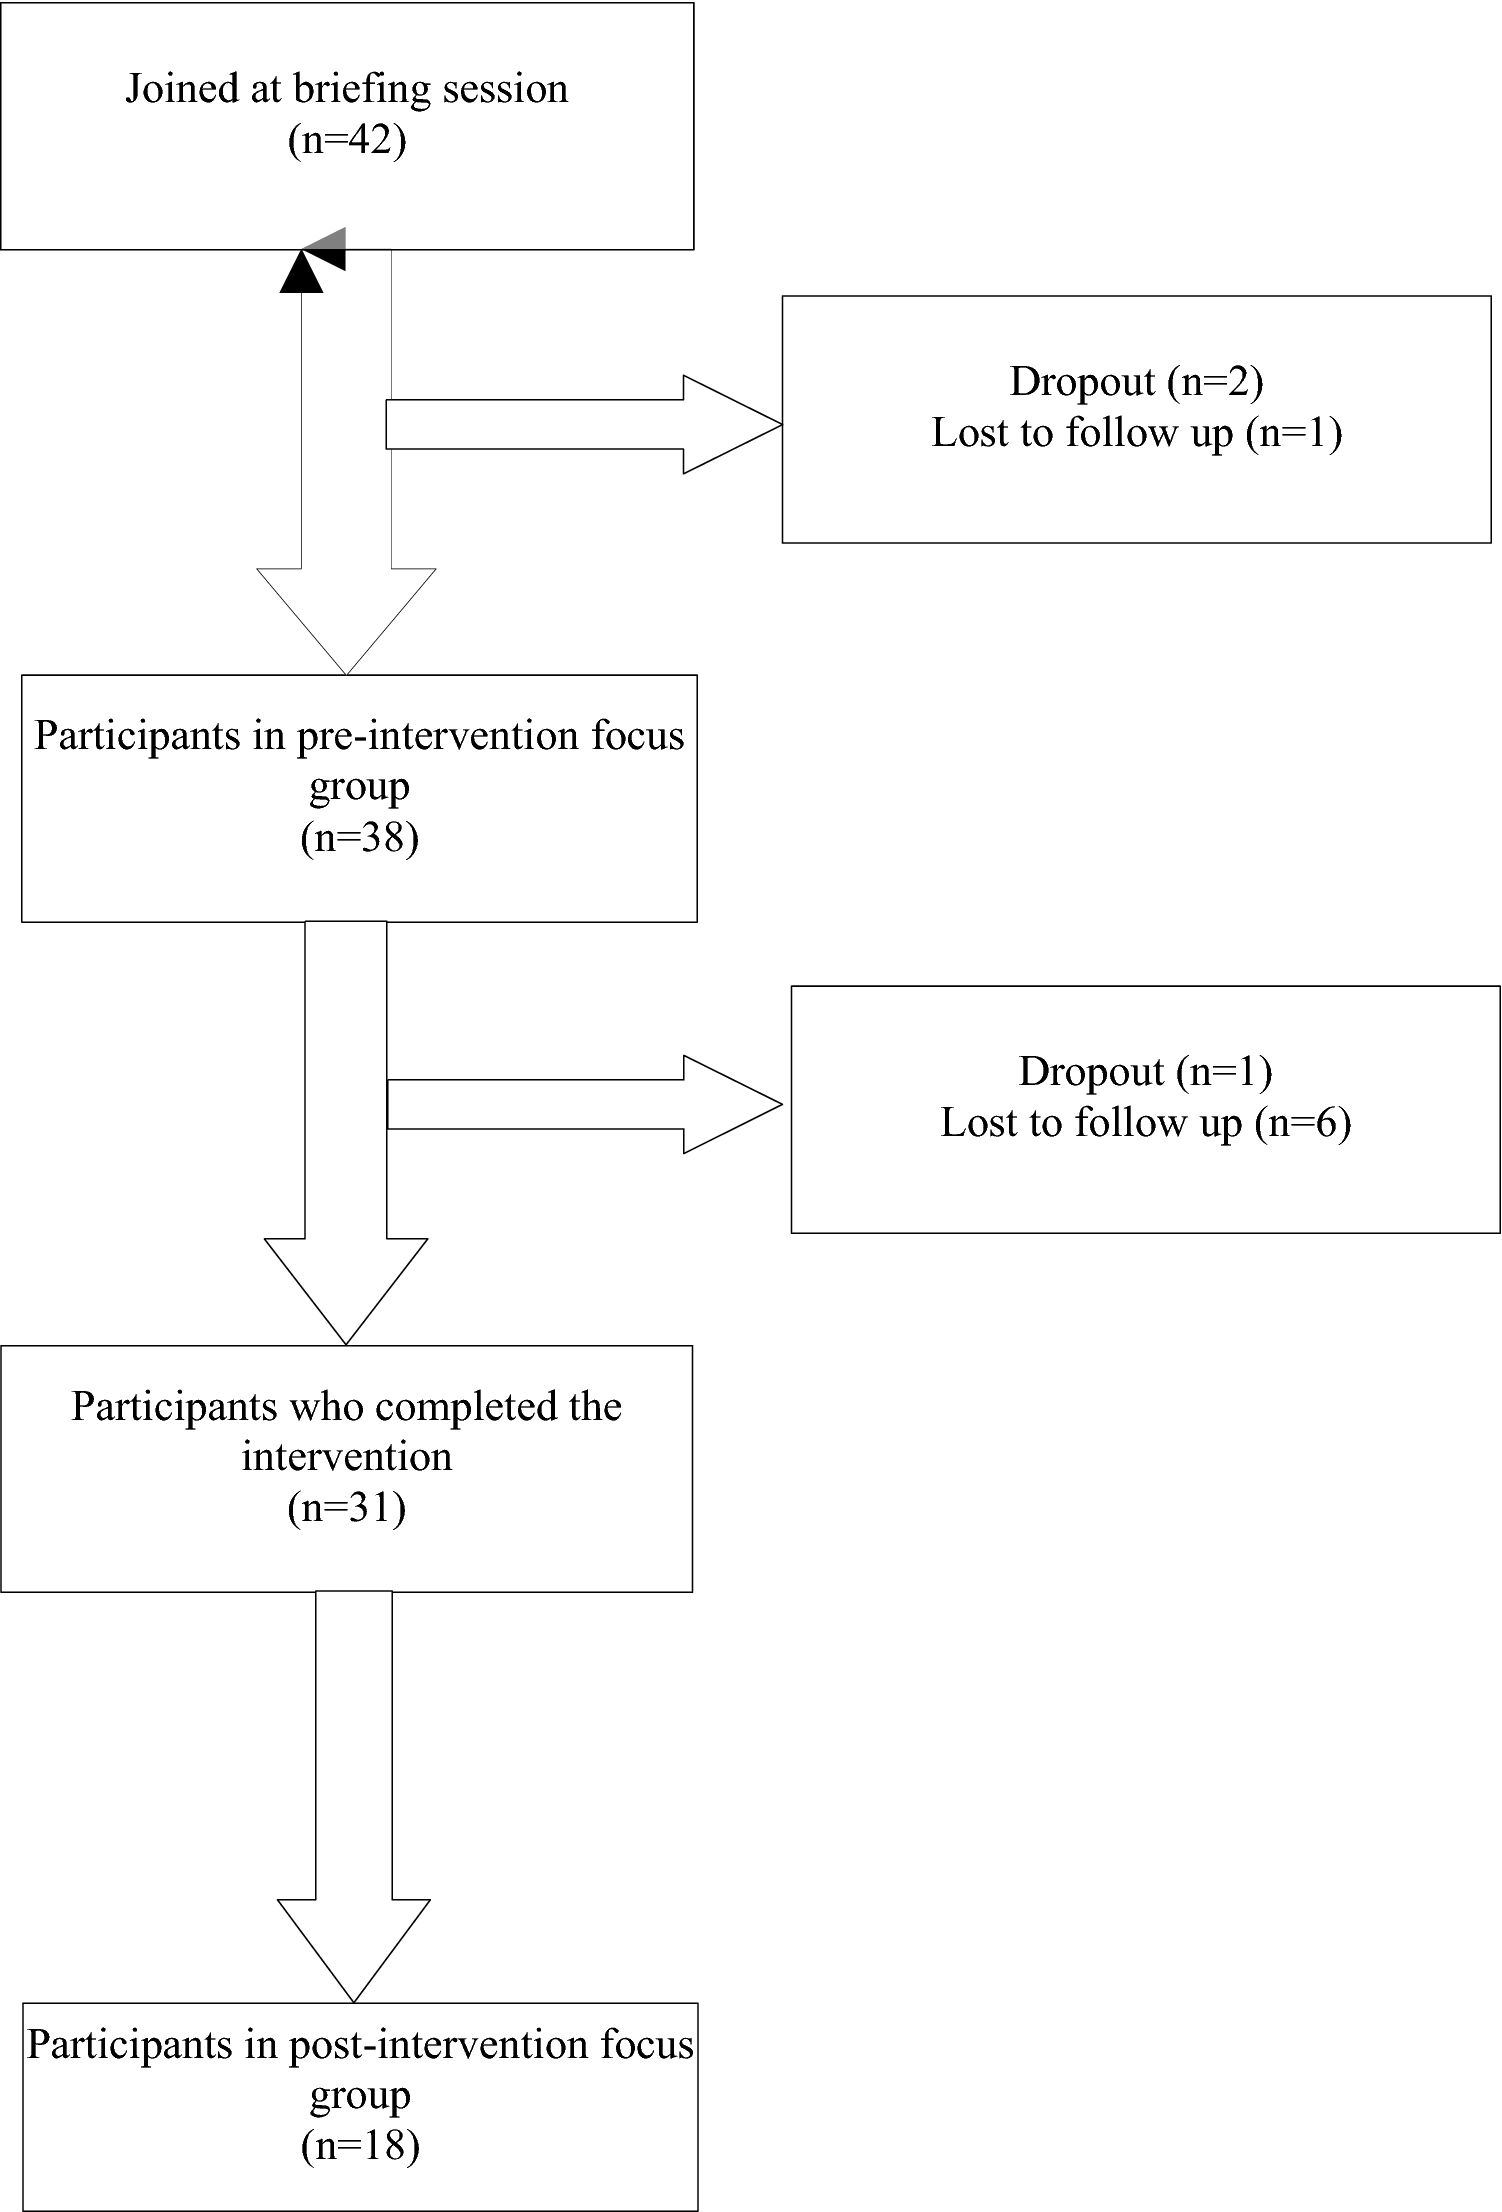 Português : Clinical Outcomes in Routine Evaluation (and CST)